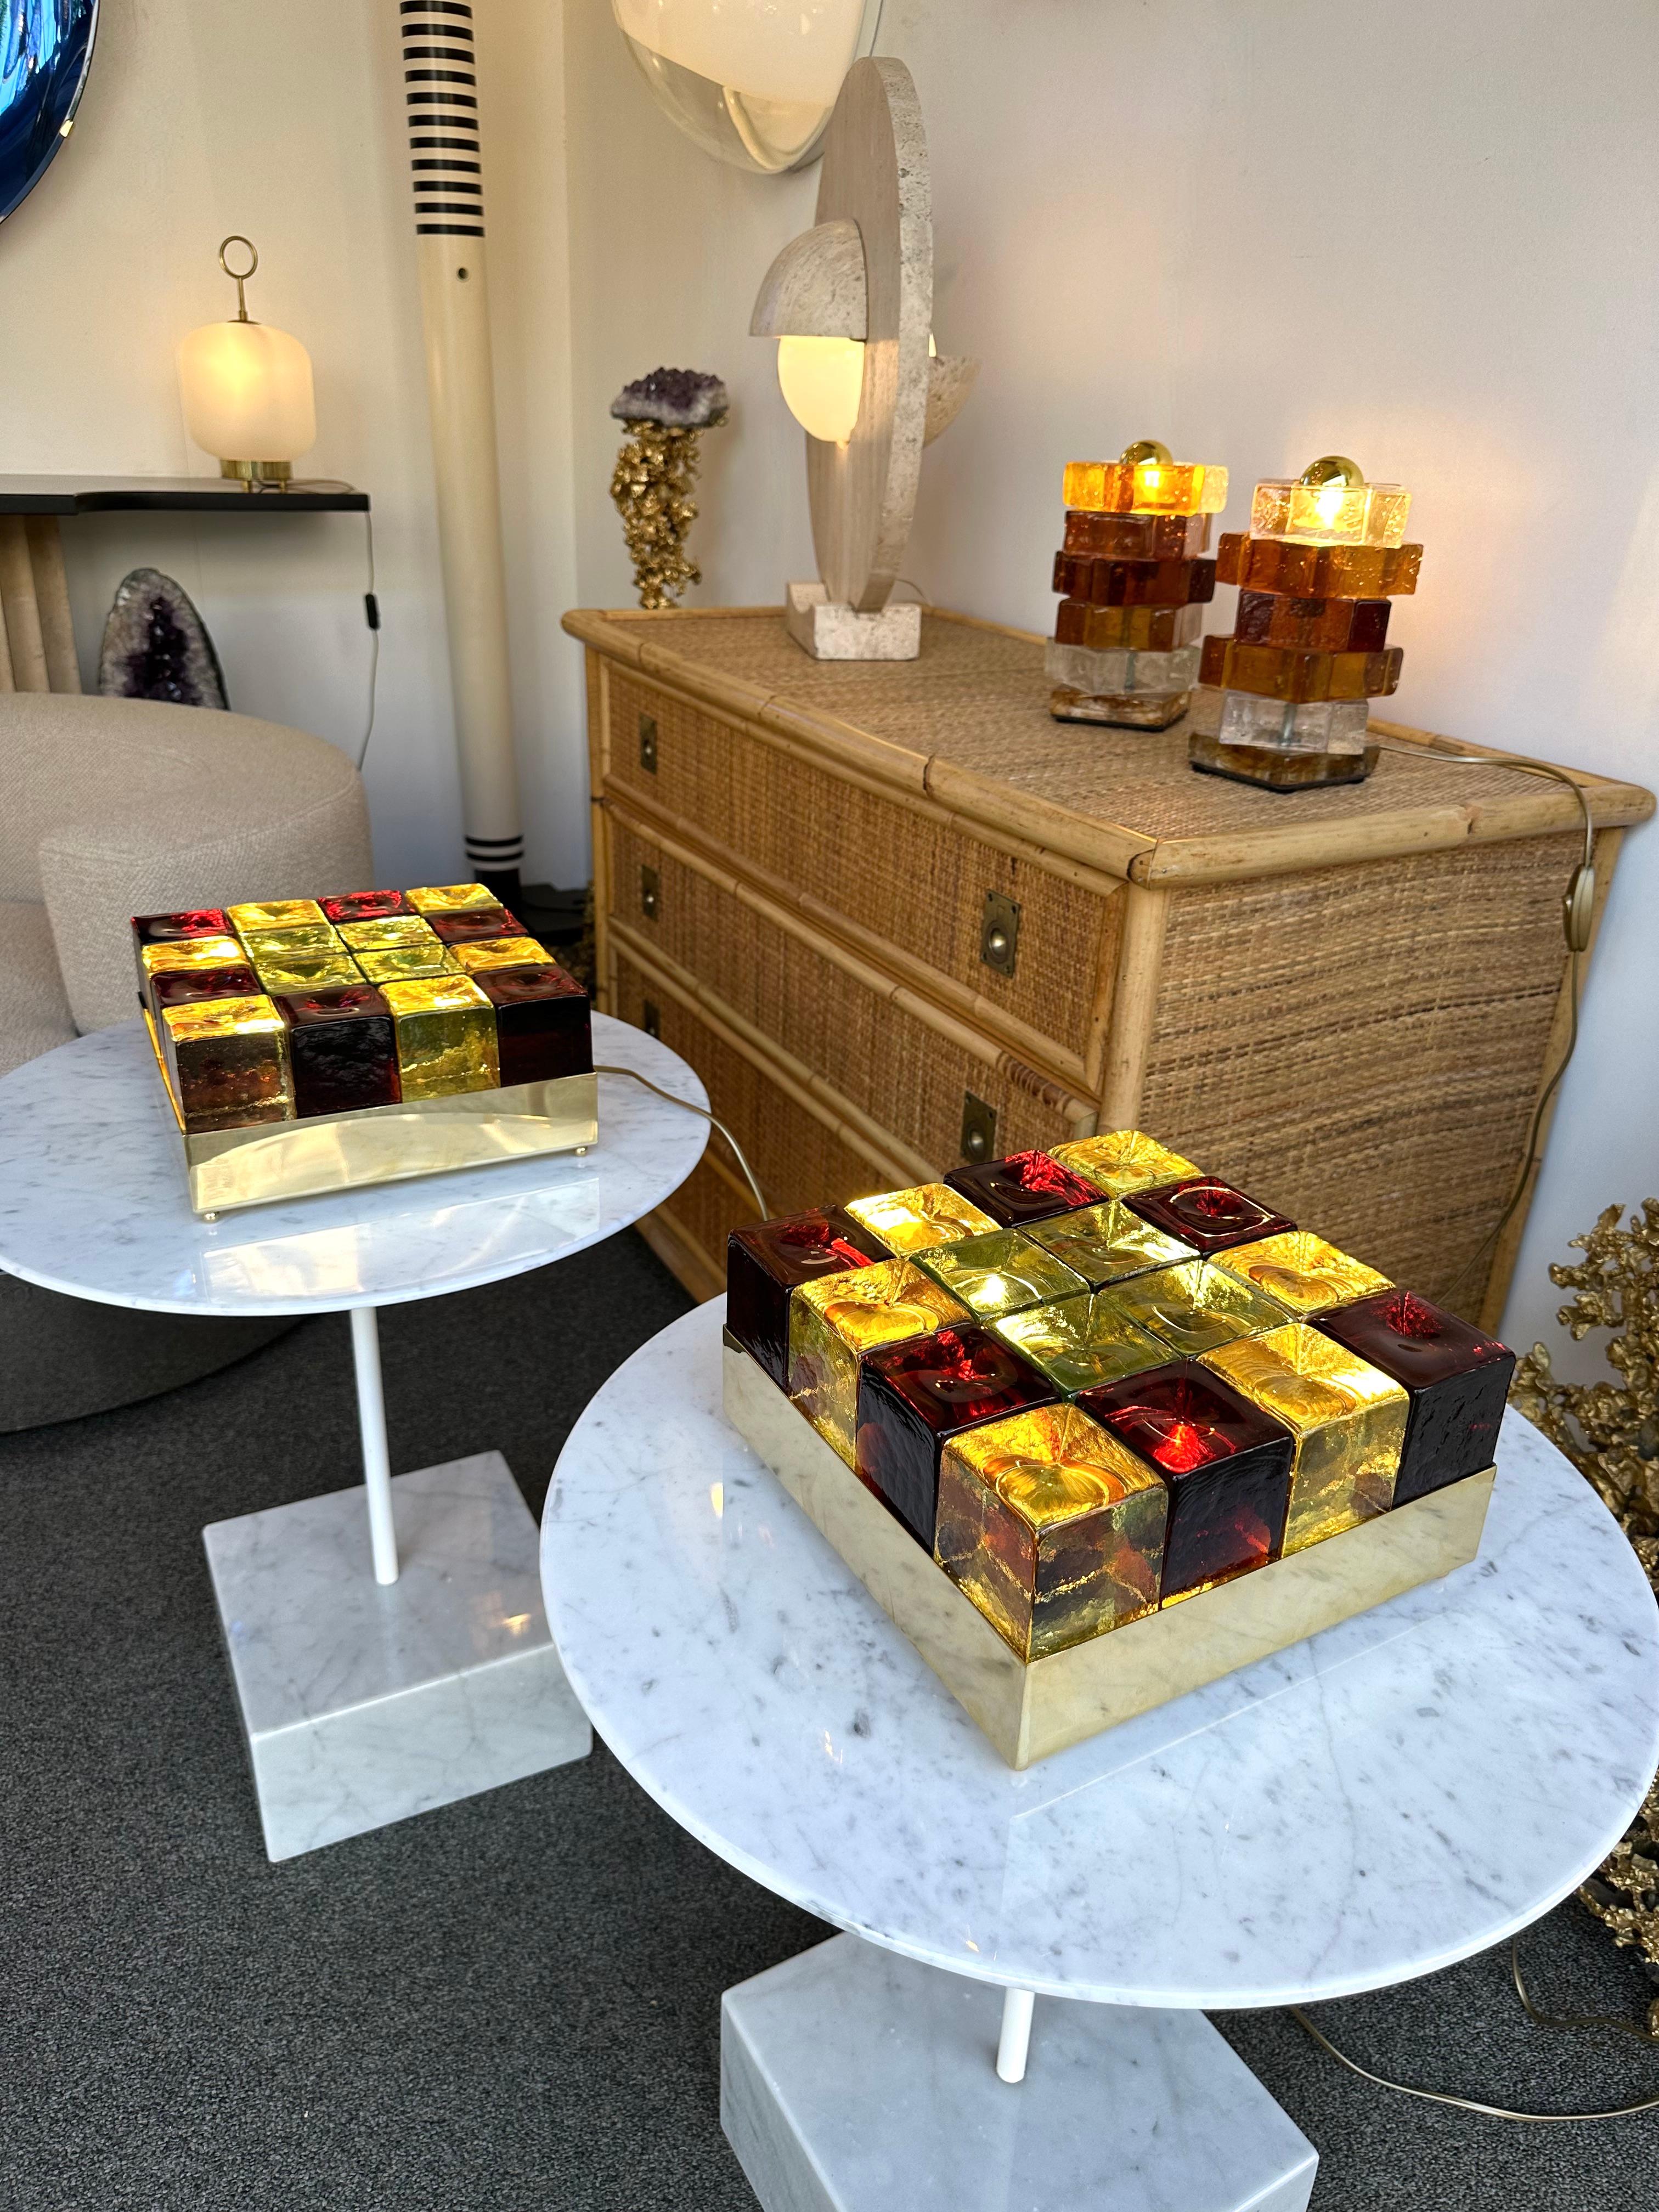 Pair of table or bedside brass box lamps with Murano glass cube marquetry. Contemporary work from a small italian artisanal design workshop in a Mid-Century Modern Space Age mood like Vistosi, Poliarte, Mazzega, Carlo Aldo Nason, Venini.